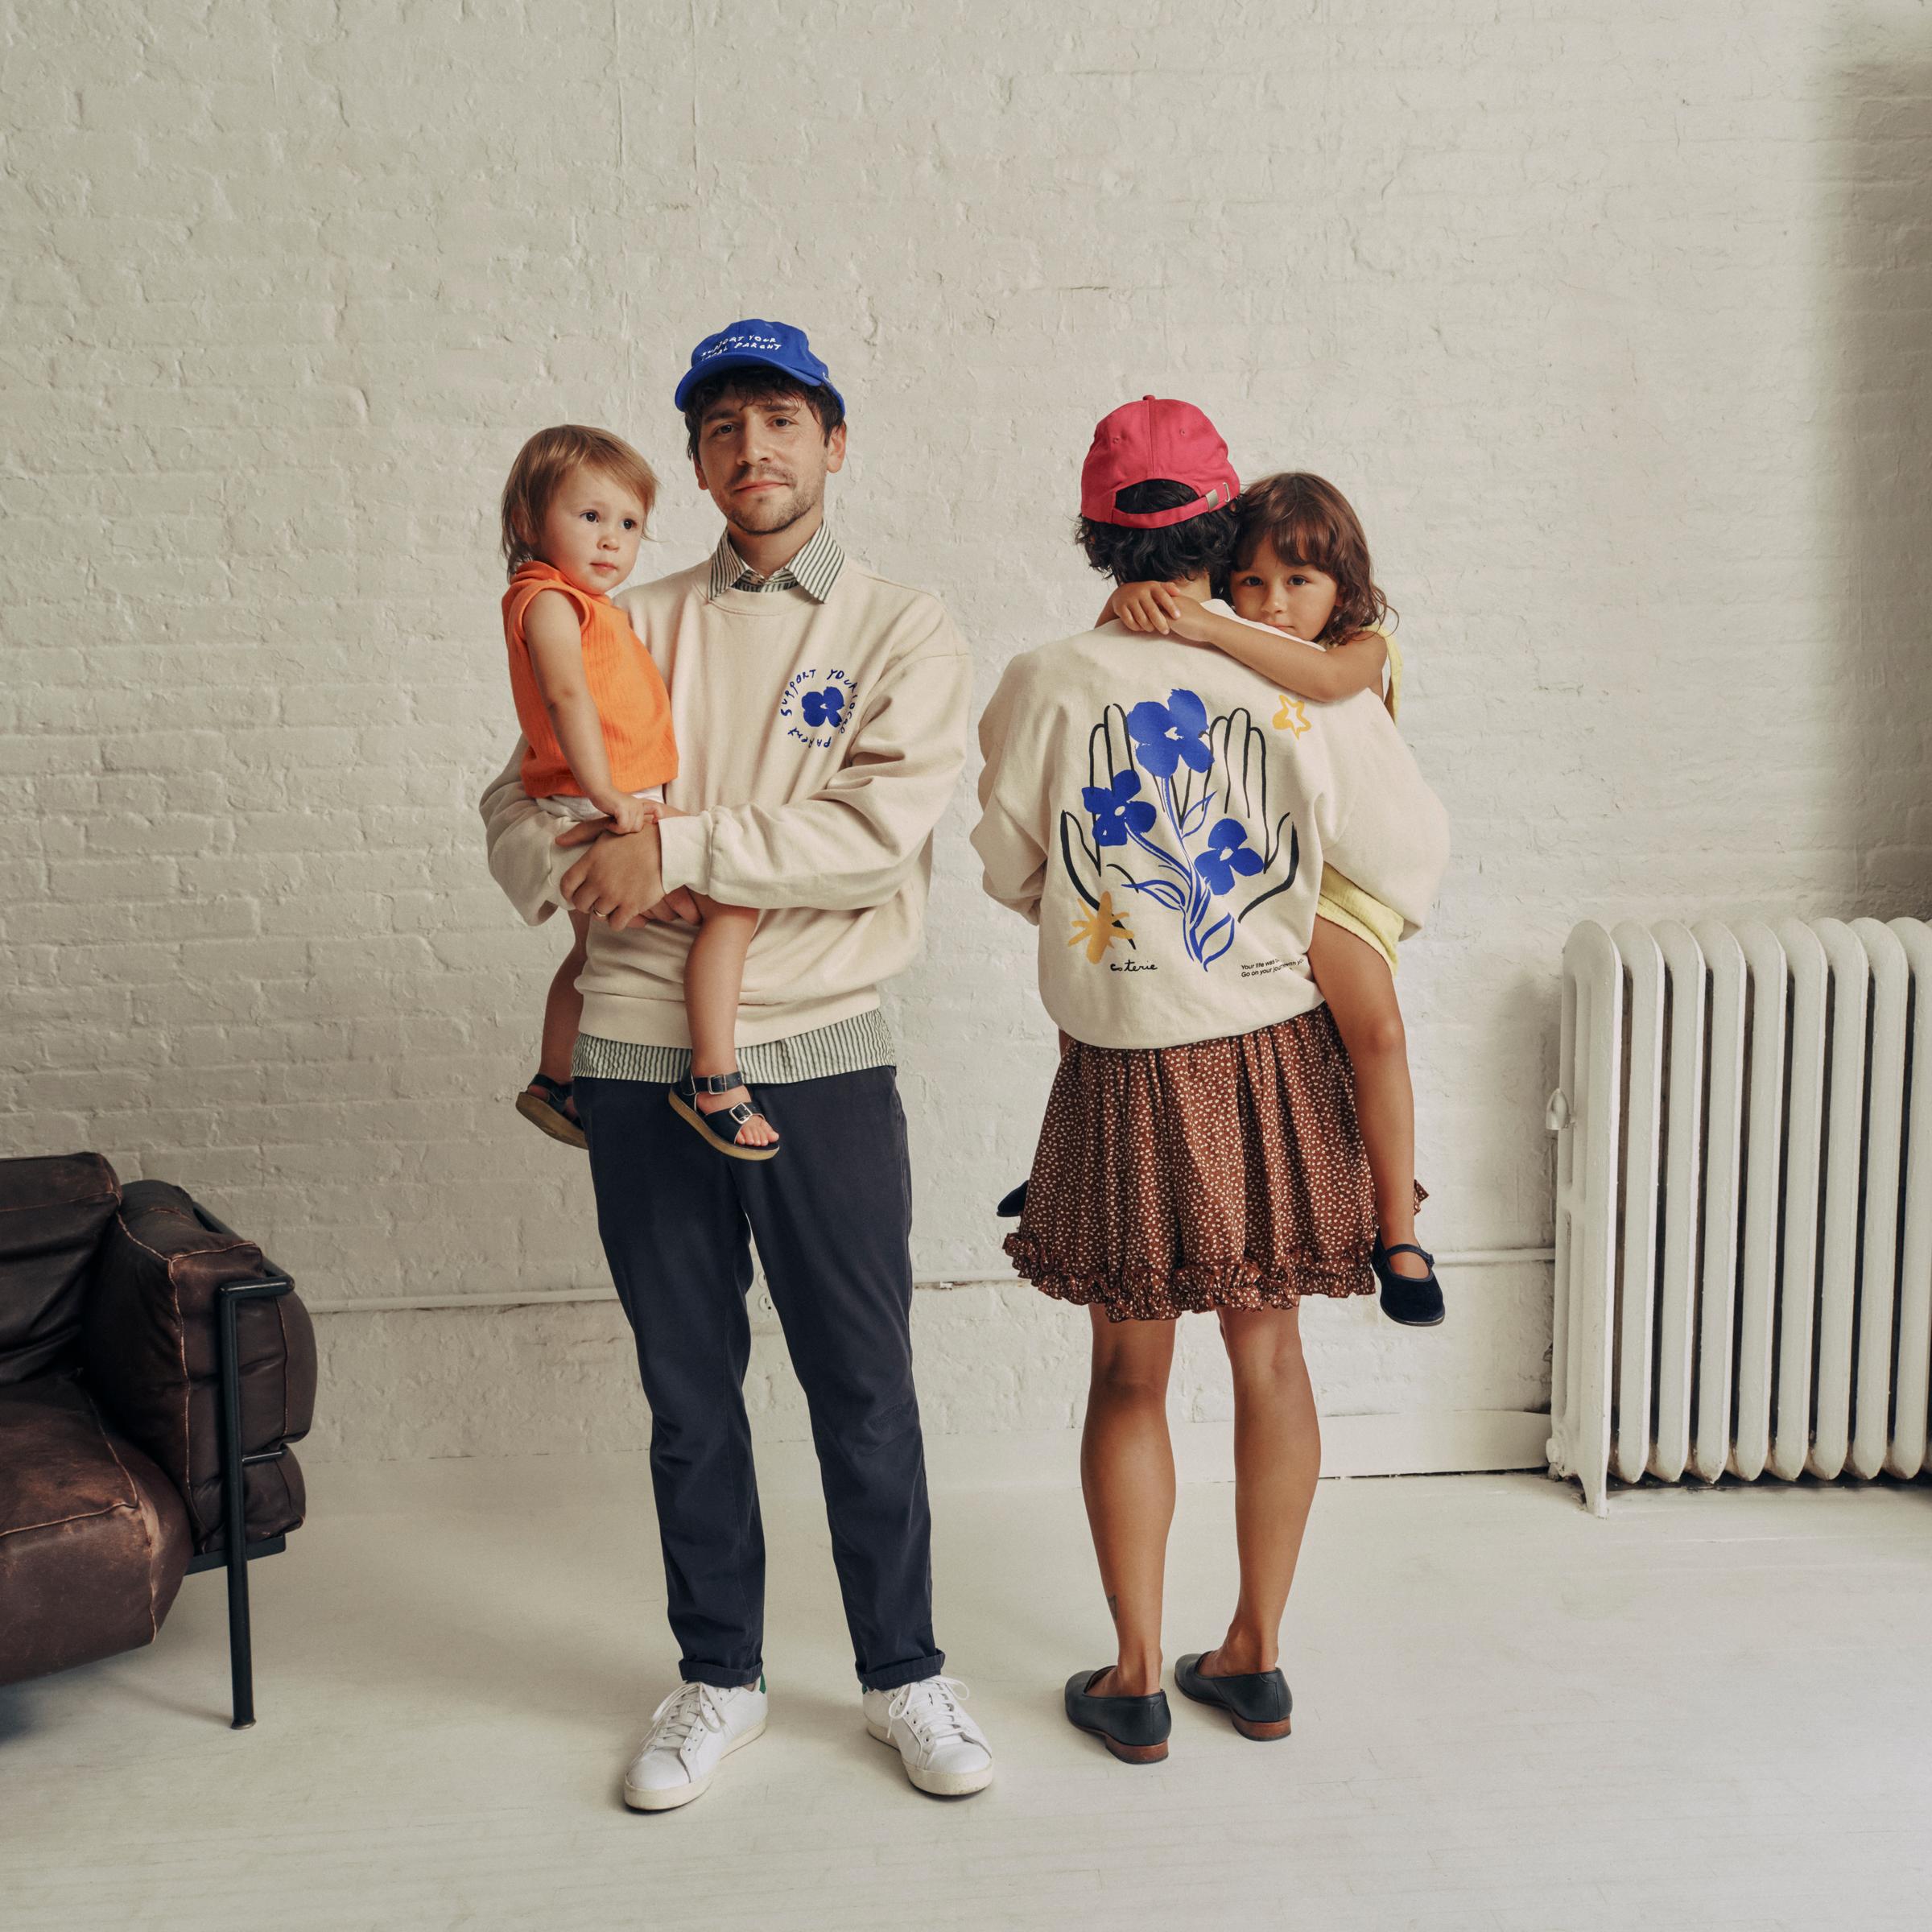 A family shows off the SYLP merch, including the crewneck and the classic cap is blue and berry.